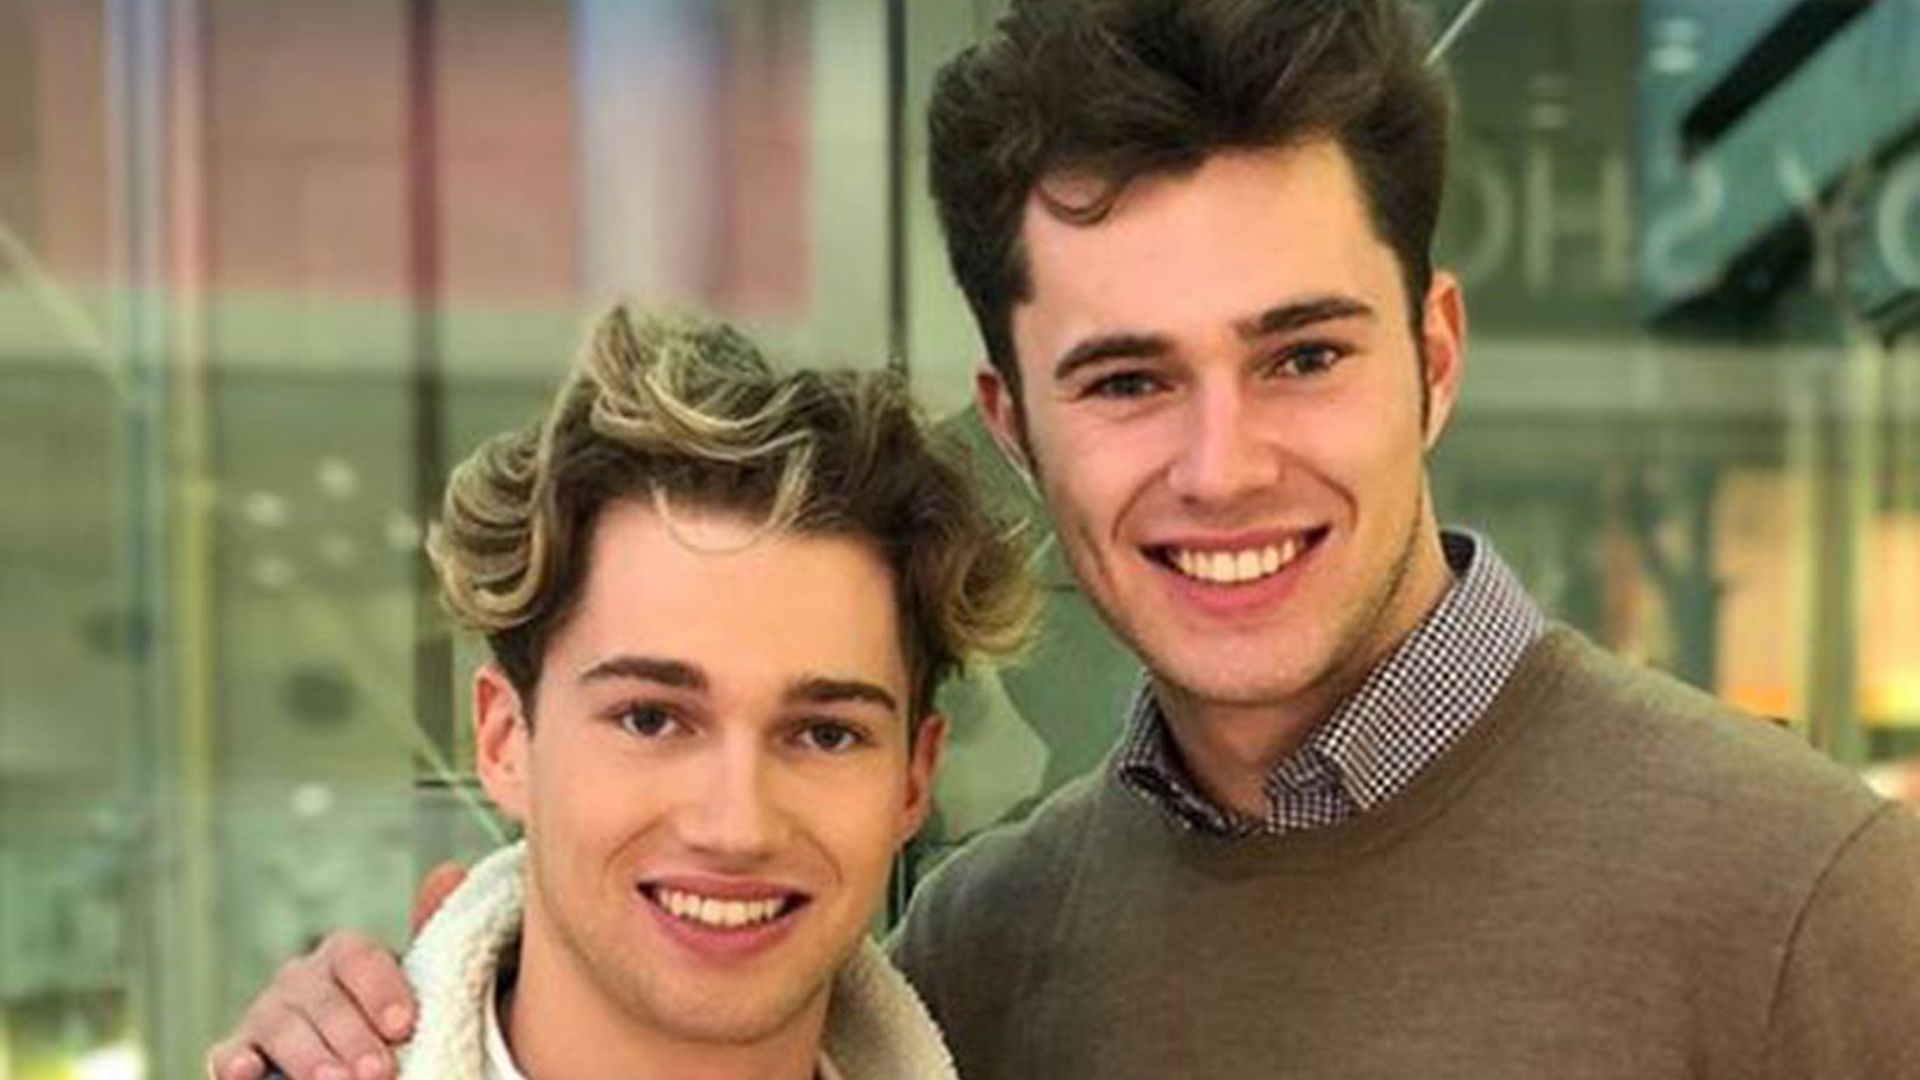 Strictly Come Dancing's AJ Pritchard and brother Curtis injured in nightclub attack